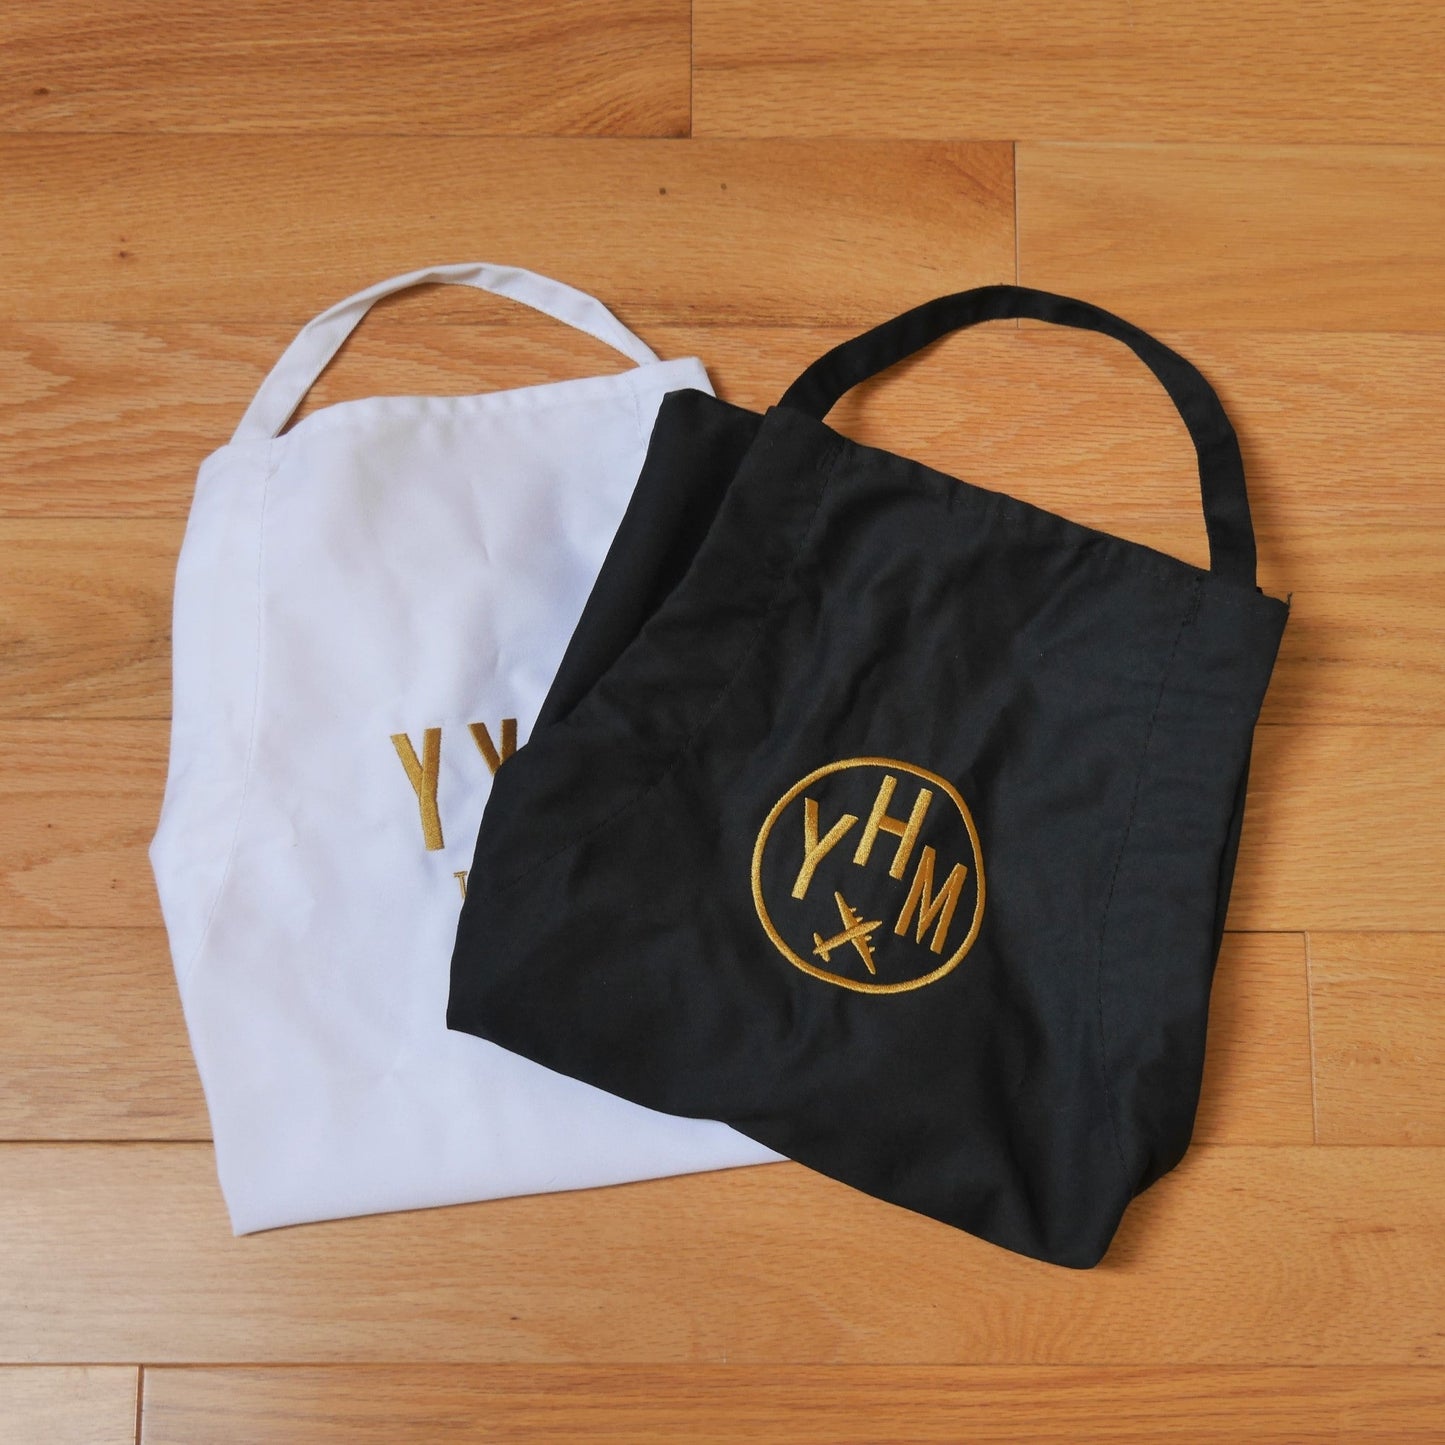 City Embroidered Apron - Old Gold • MKC Kansas City • YHM Designs - Image 14